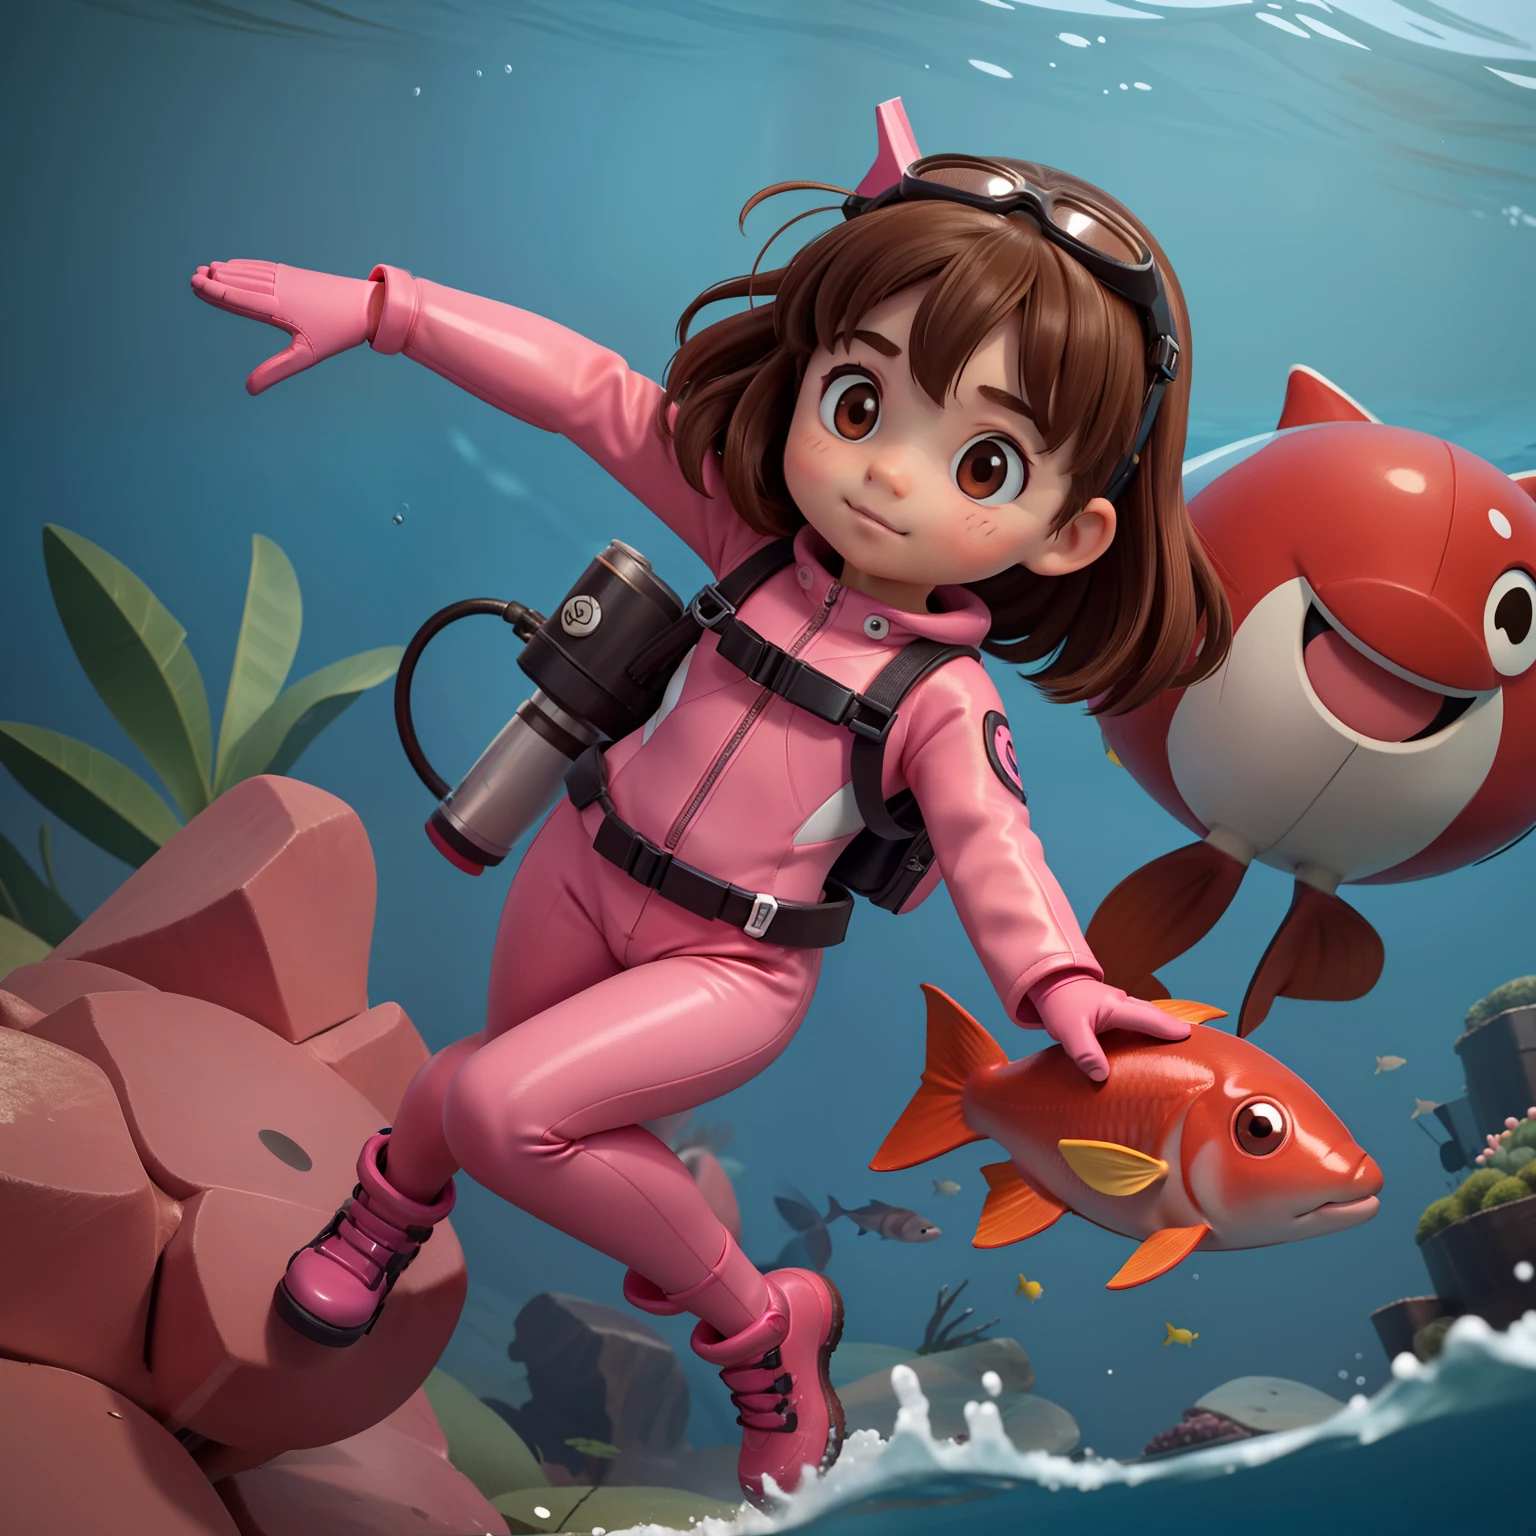 "Frontal image of a 5-year-old girl searching for fishes in the deep sea, with brown hair, brown eyes, rosy cheeks, diving goggles, pink diving suit, diving gloves, diving shoes, in a 2D illustration style of a children's book."